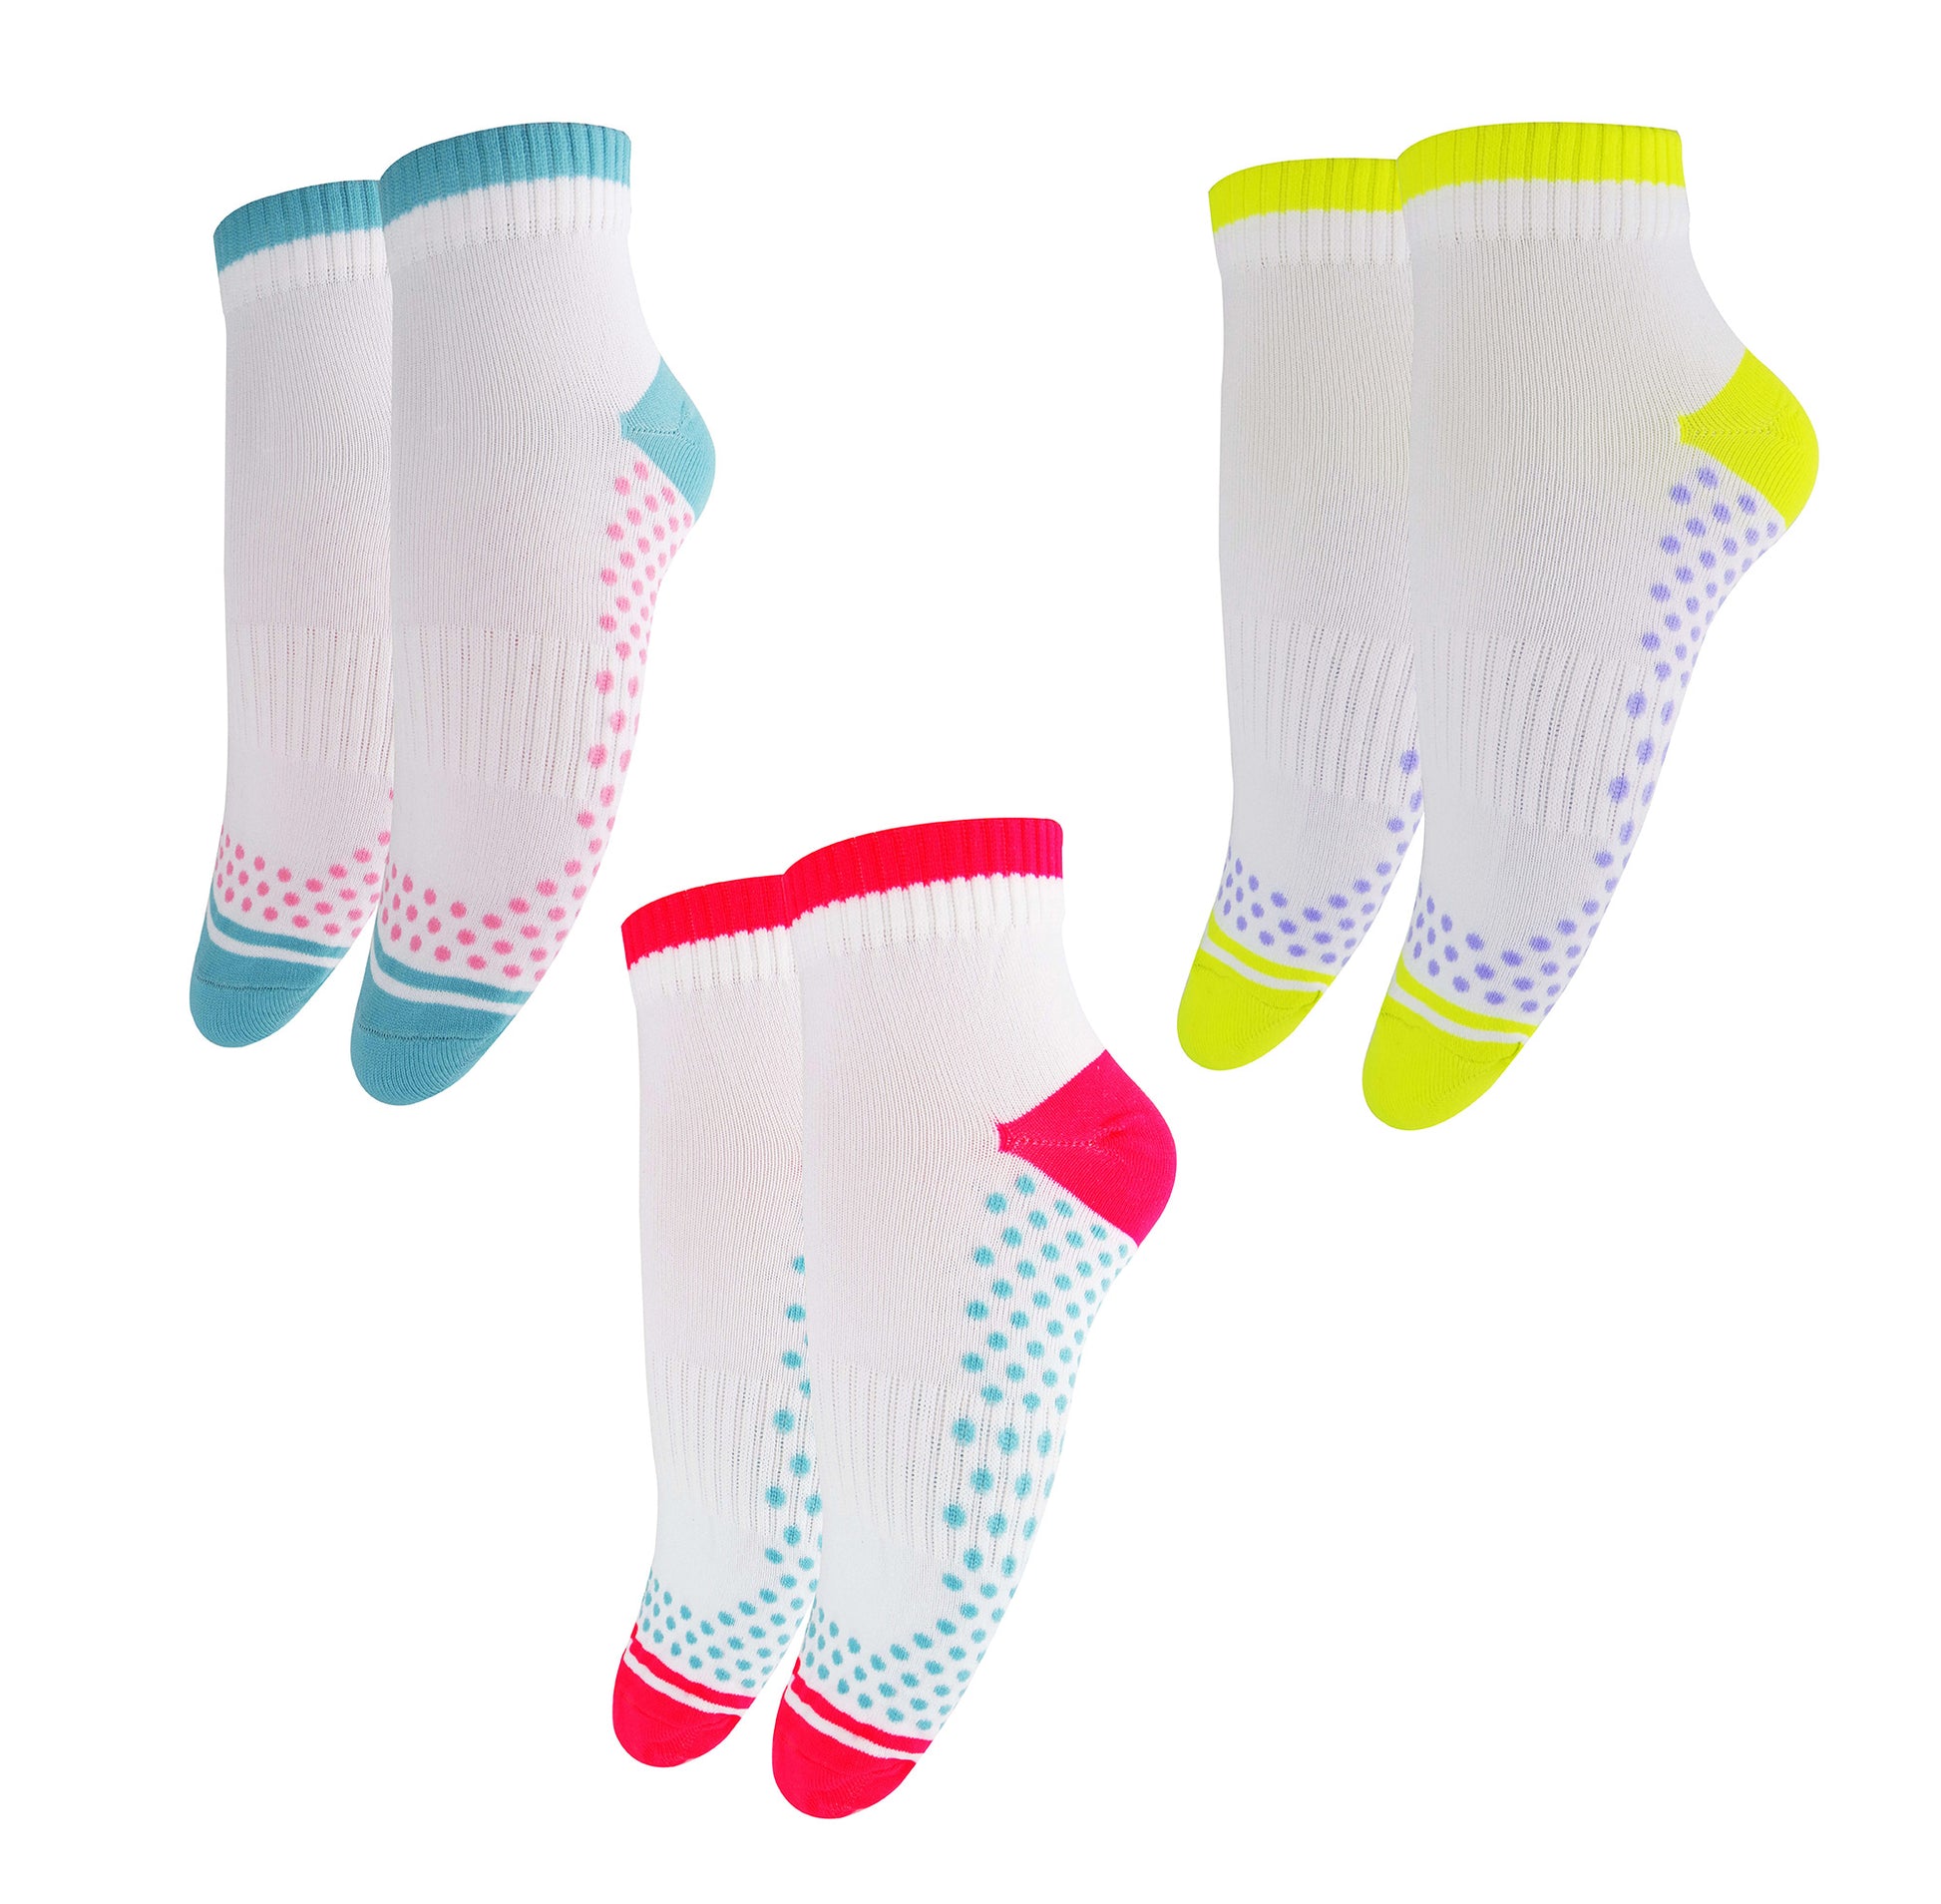 showcasing women's low cut grip performance socks, featuring specialized traction for stability and support during workouts